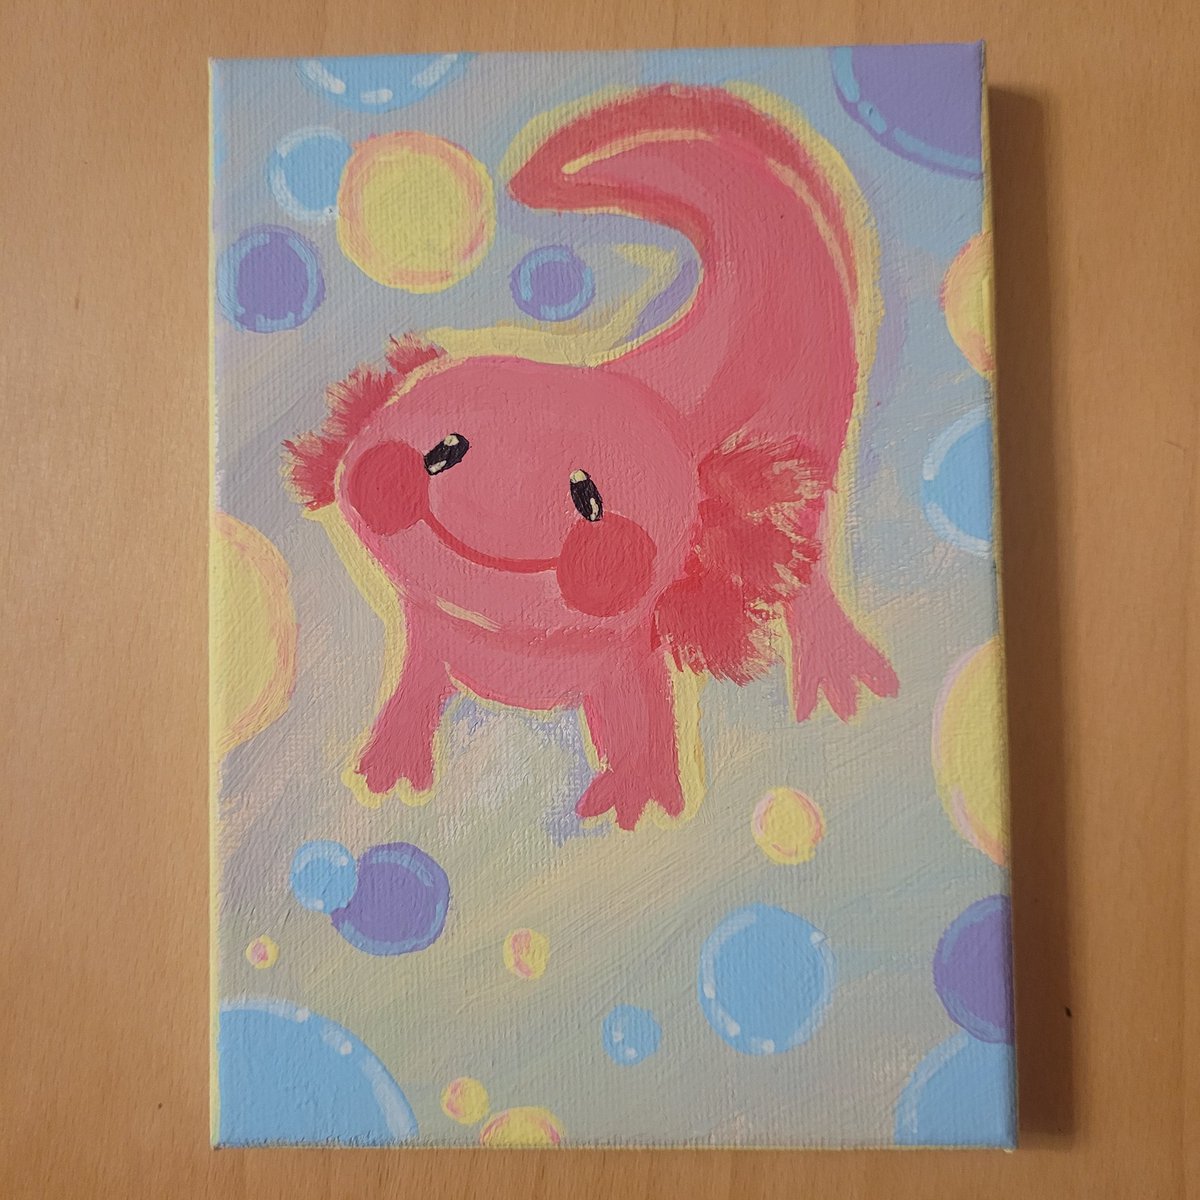 small boy, baby, tiny tiny boy. does not know anything, does not even know abc's. just knows be little and nap. so pure. #acrylicpainting #axolotl #axolotlart #pastellove #bubbles